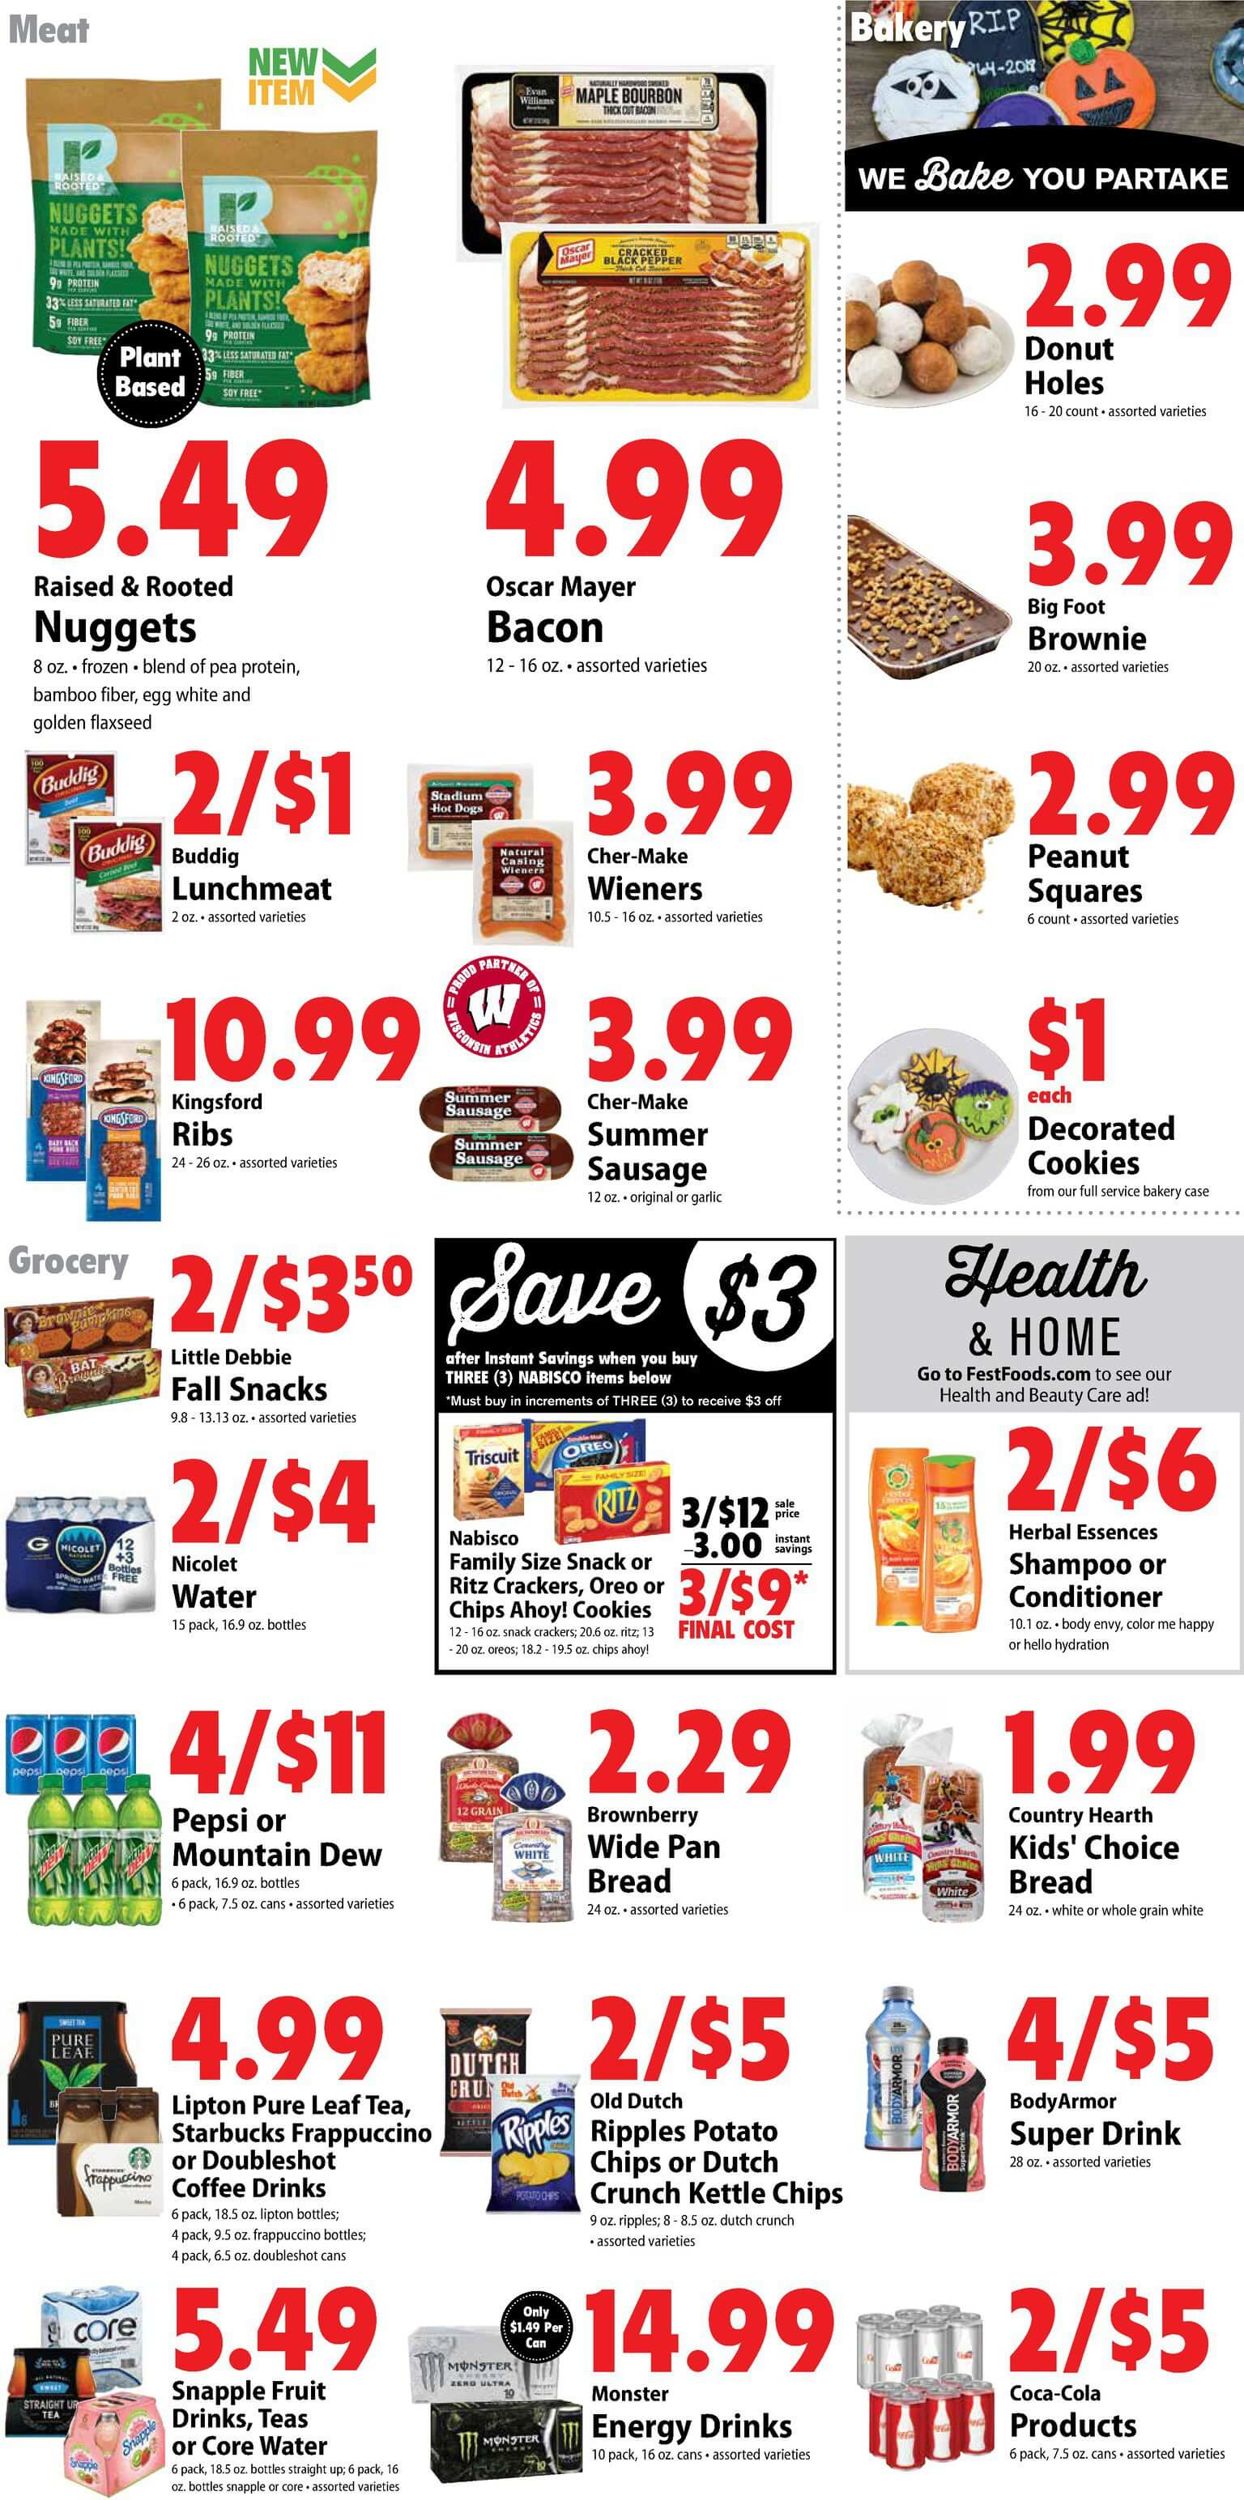 Festival Foods Weekly Ad Circular - valid 10/02-10/08/2019 (Page 5)